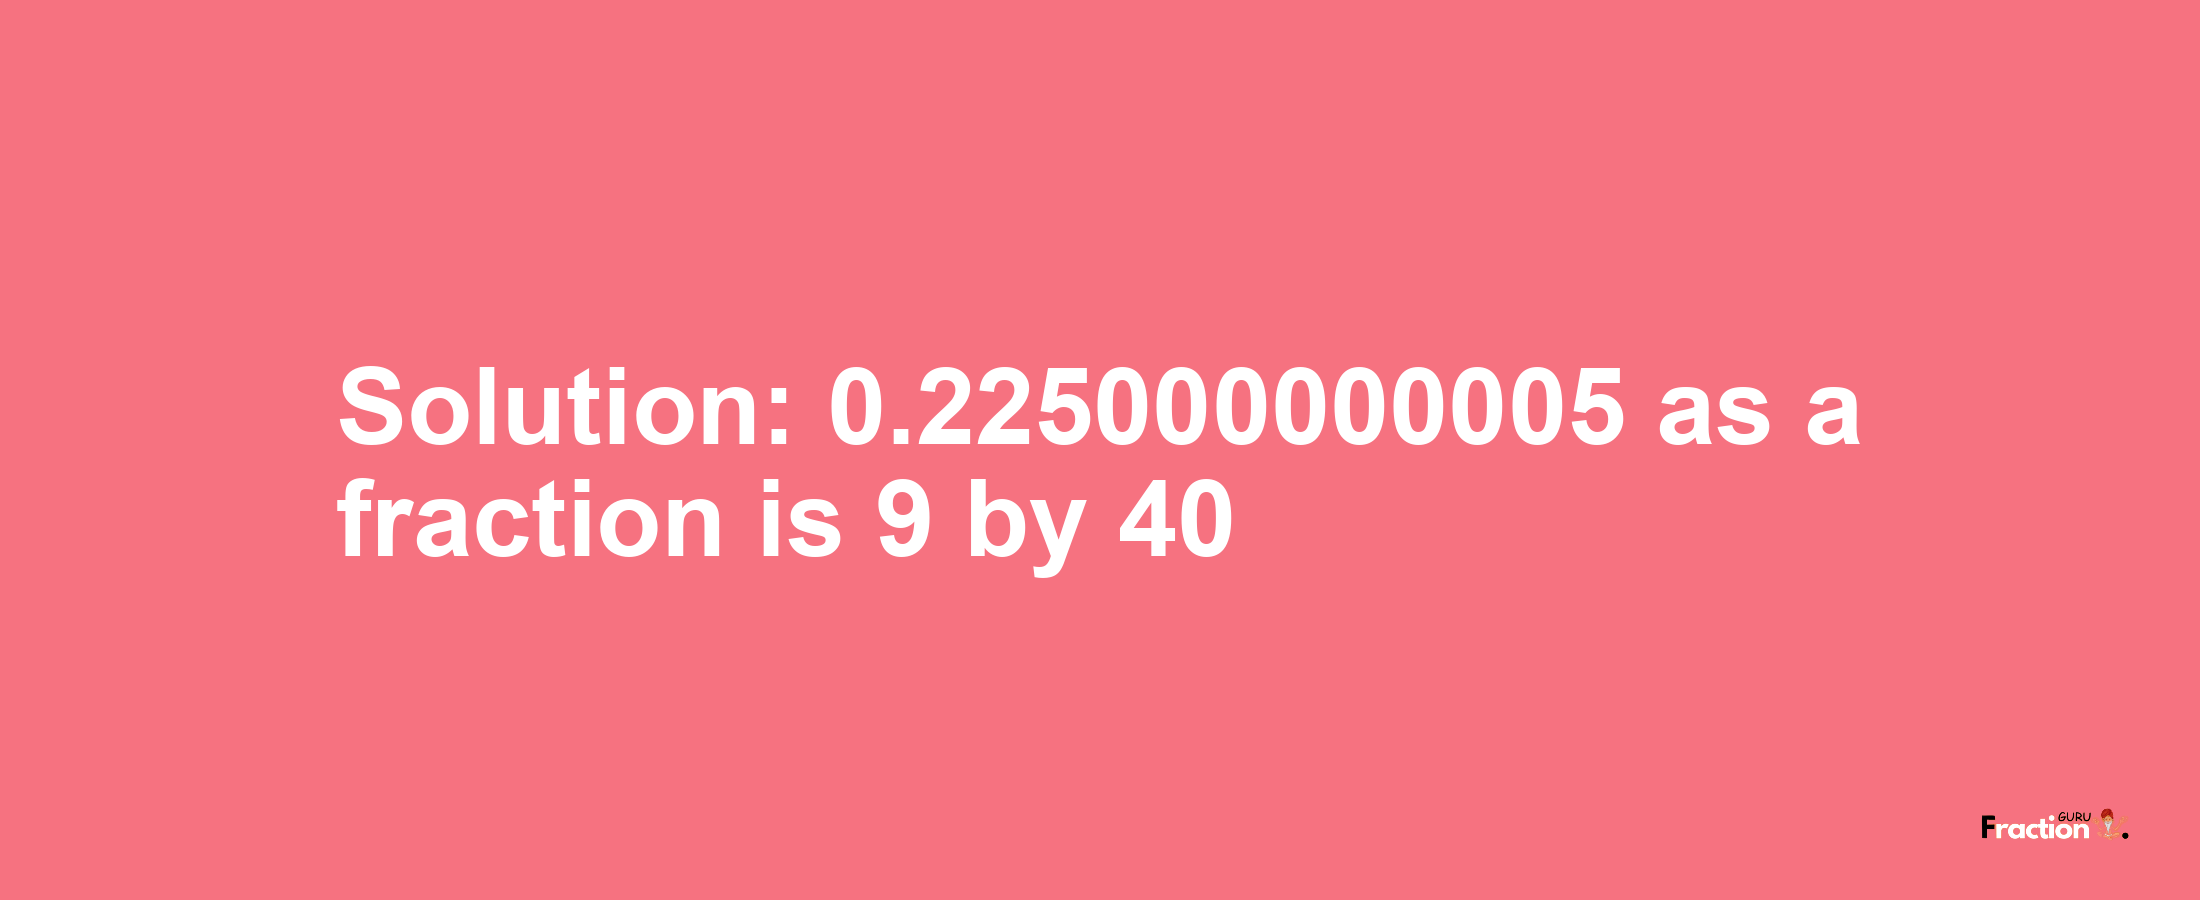 Solution:0.225000000005 as a fraction is 9/40